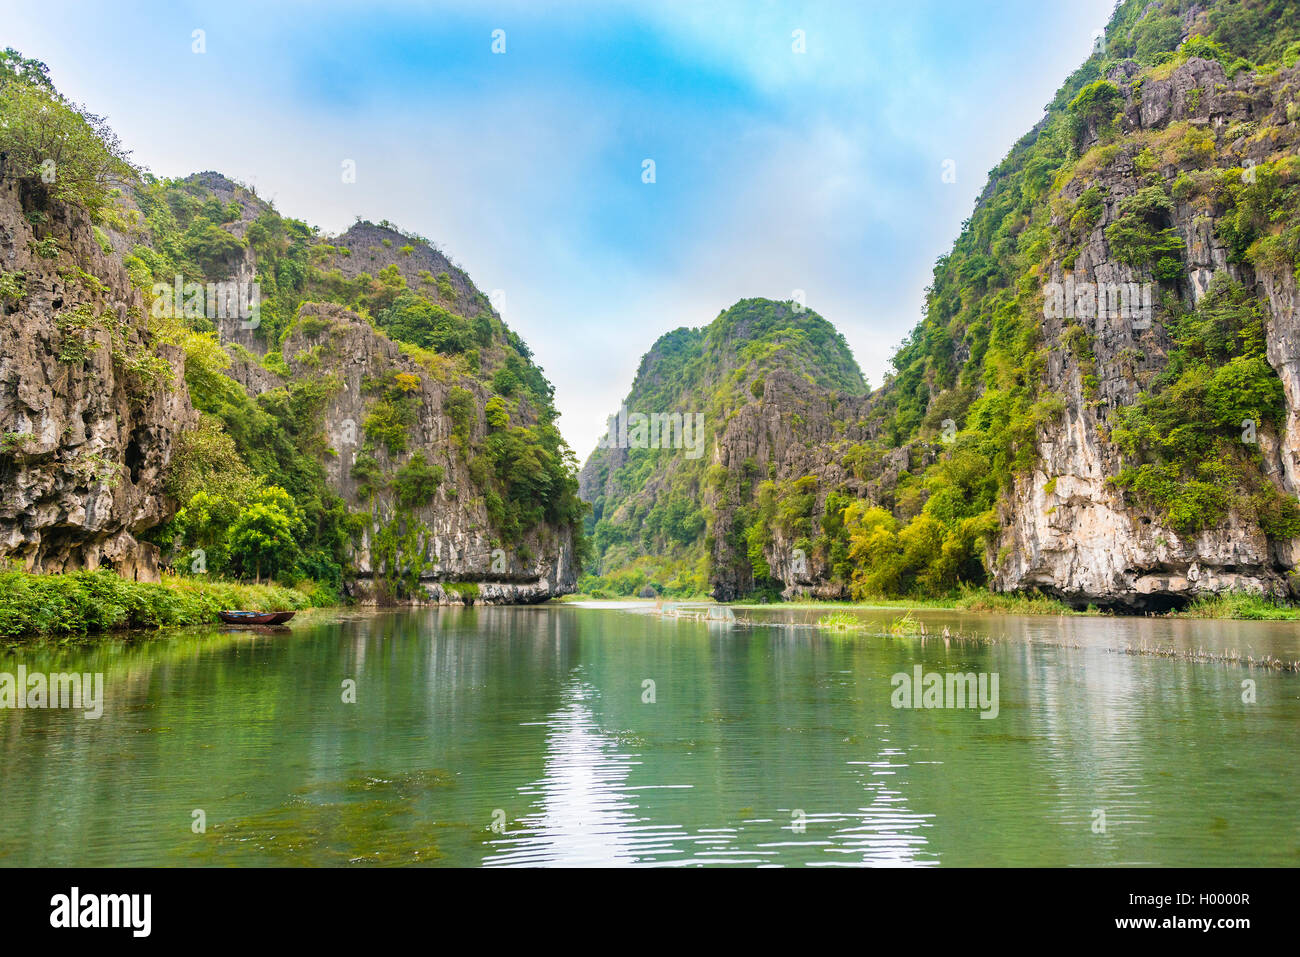 Forested limestone rocks, karst mountains, river landscape, Ngo Dong River, Song Ngô Dong, Tam Coc, Ninh Binh, Vietnam Stock Photo